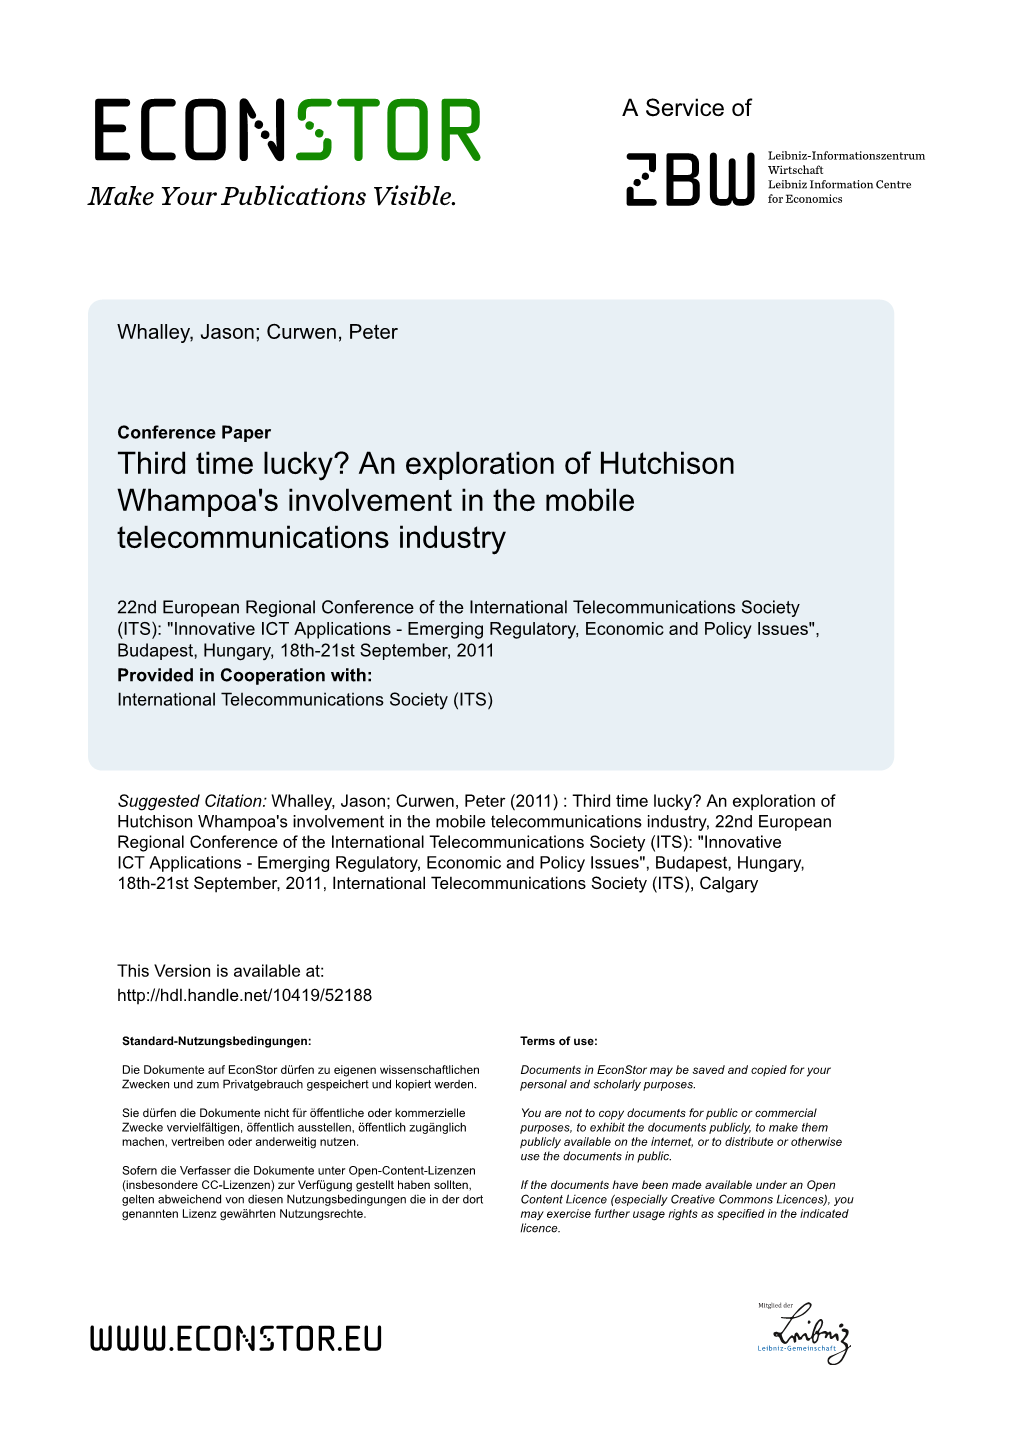 An Exploration of Hutchison Whampoa's Involvement in the Mobile Telecommunications Industry